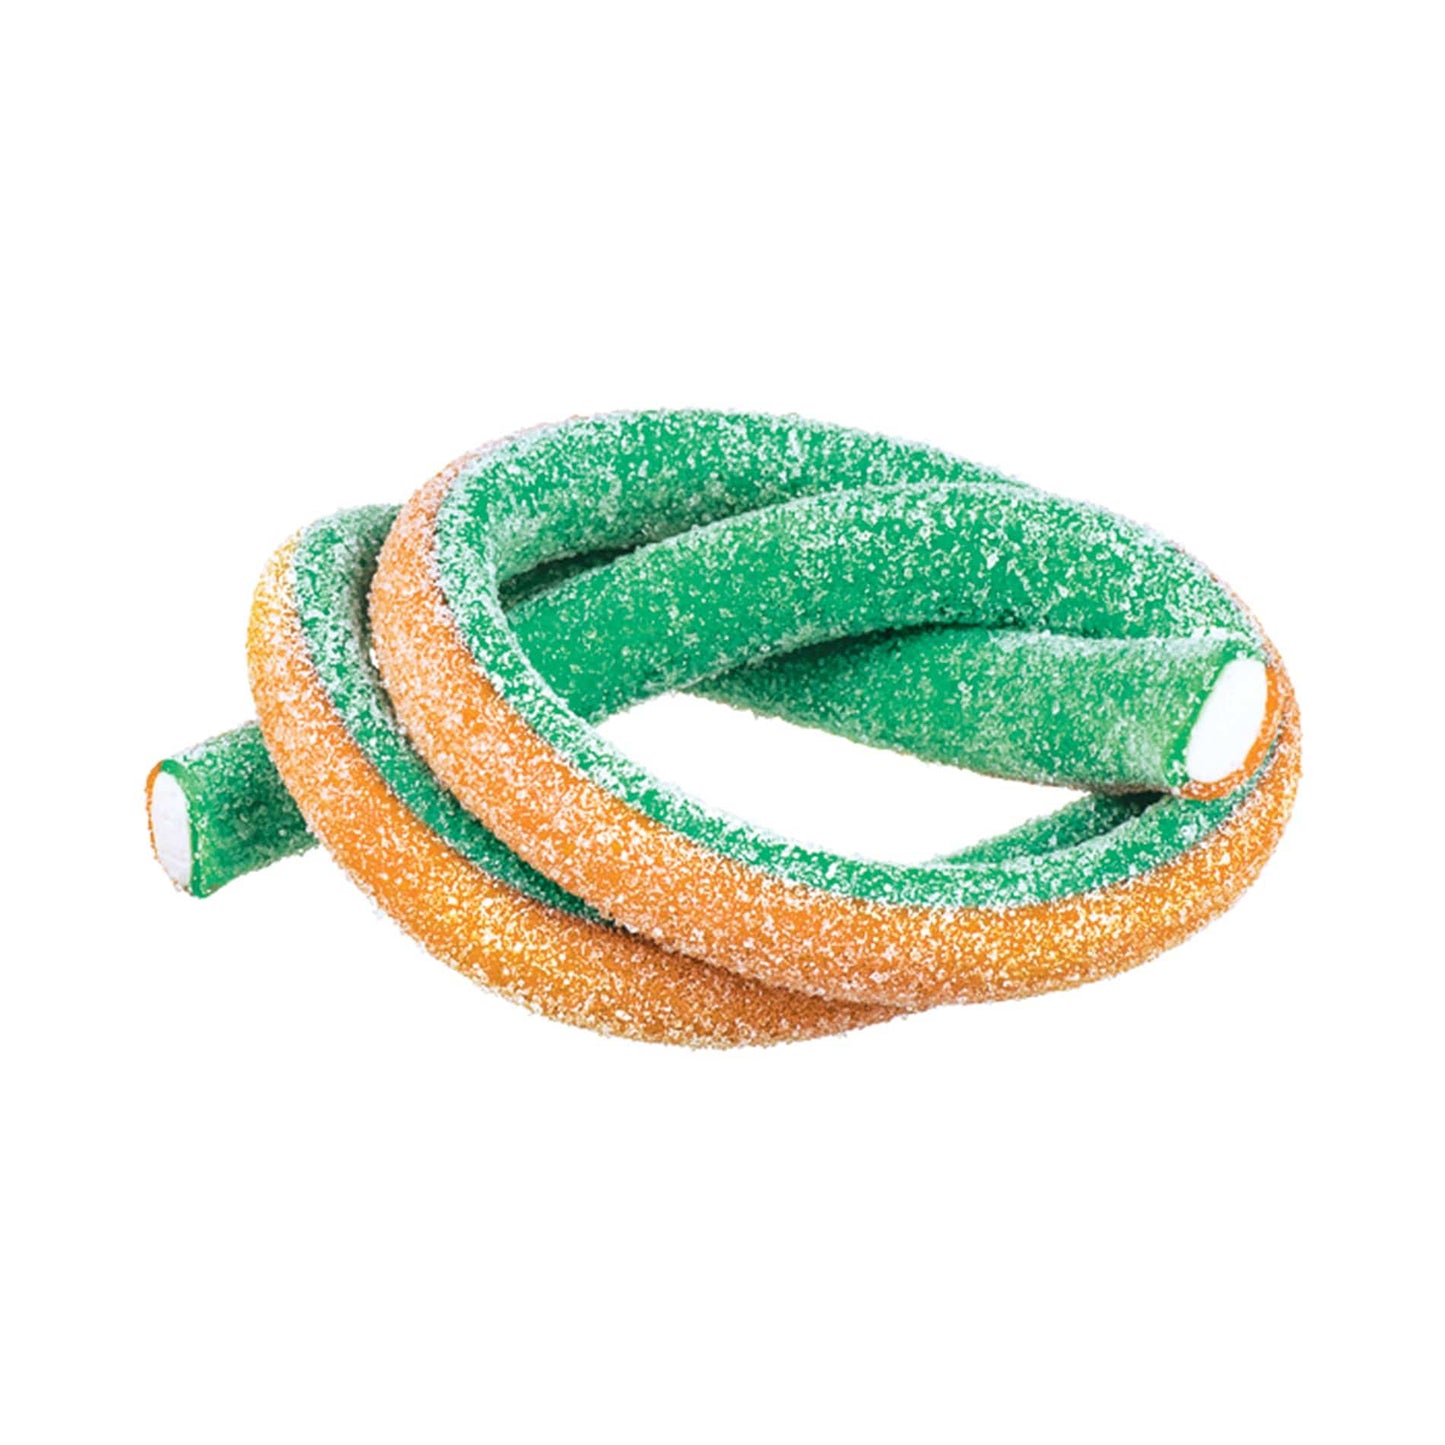 Novelty Concessions Gummy Rope SOUR ORANGE LIME / 1 Pack (30 pieces) Meeega Cables European Chewy Rope Candy - Box of 30 individually wrapped Meeega Cables, each over 2-feet long cups with lids and straws